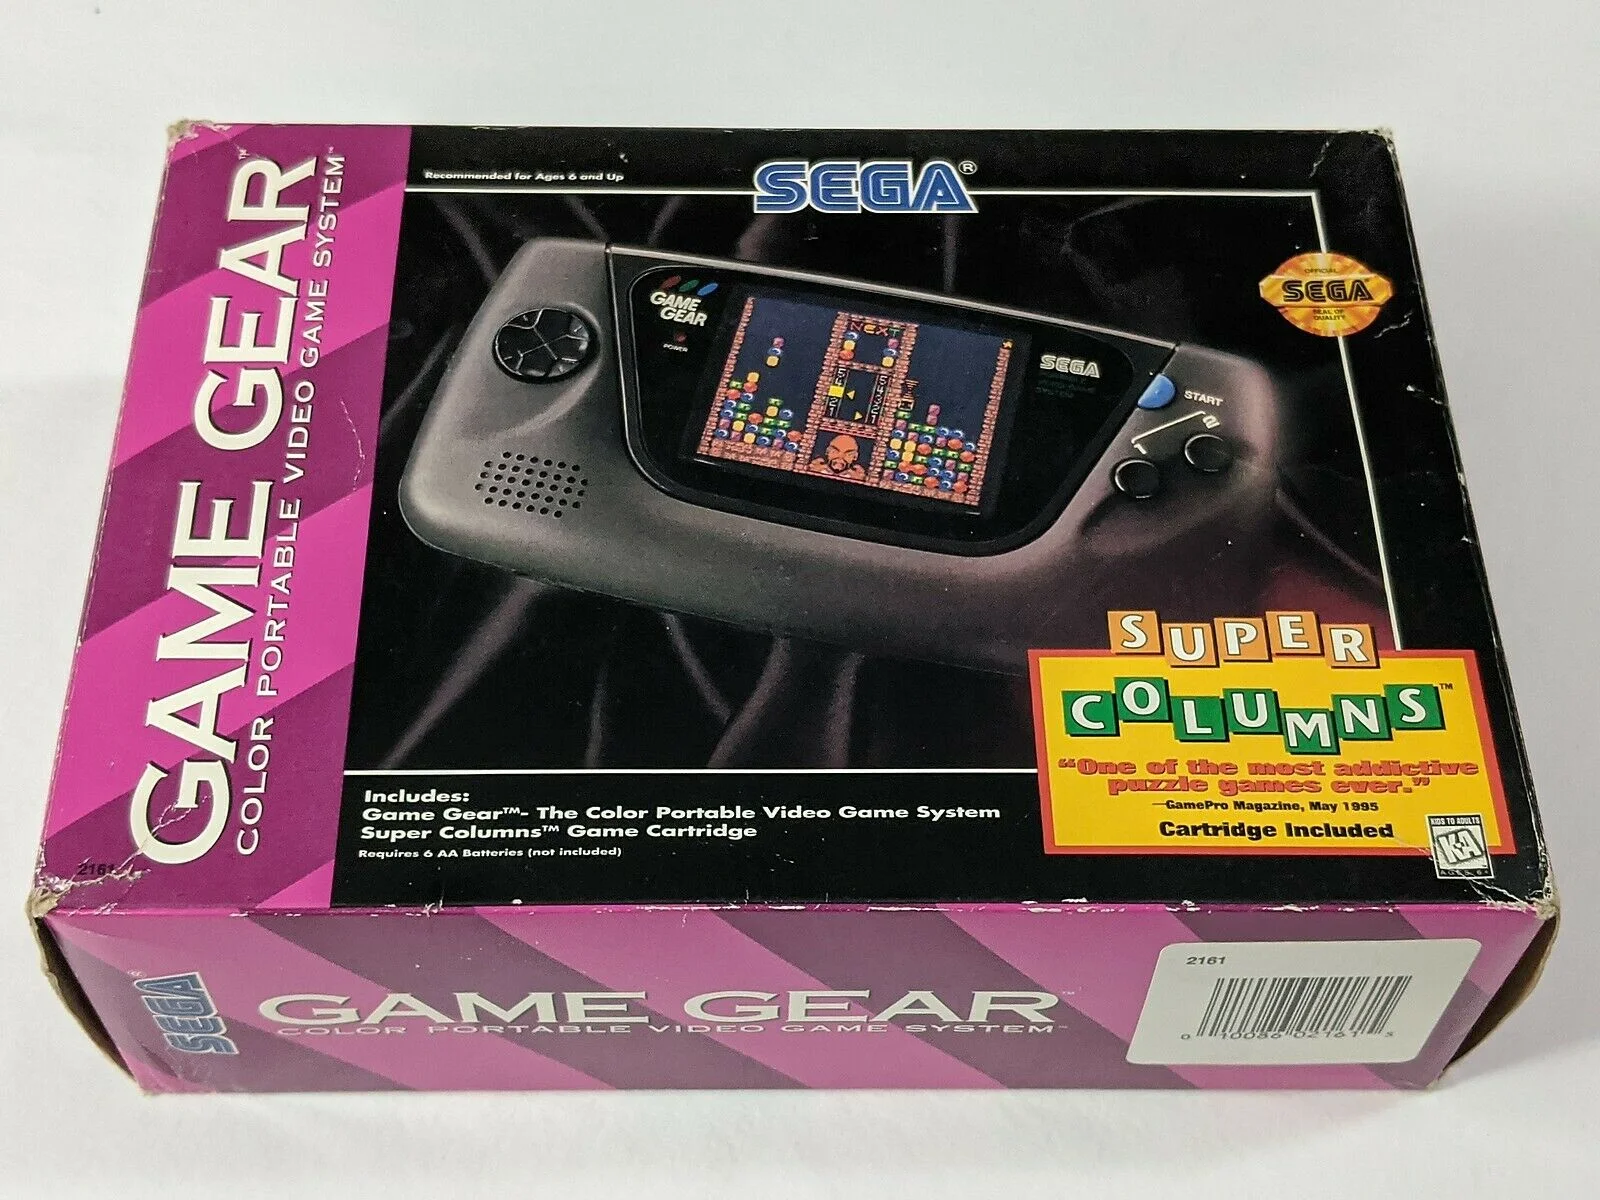 The colorful art of Super Columns also depicted on the game cover was a fantastic showcasing of Game Gear's capabilities.